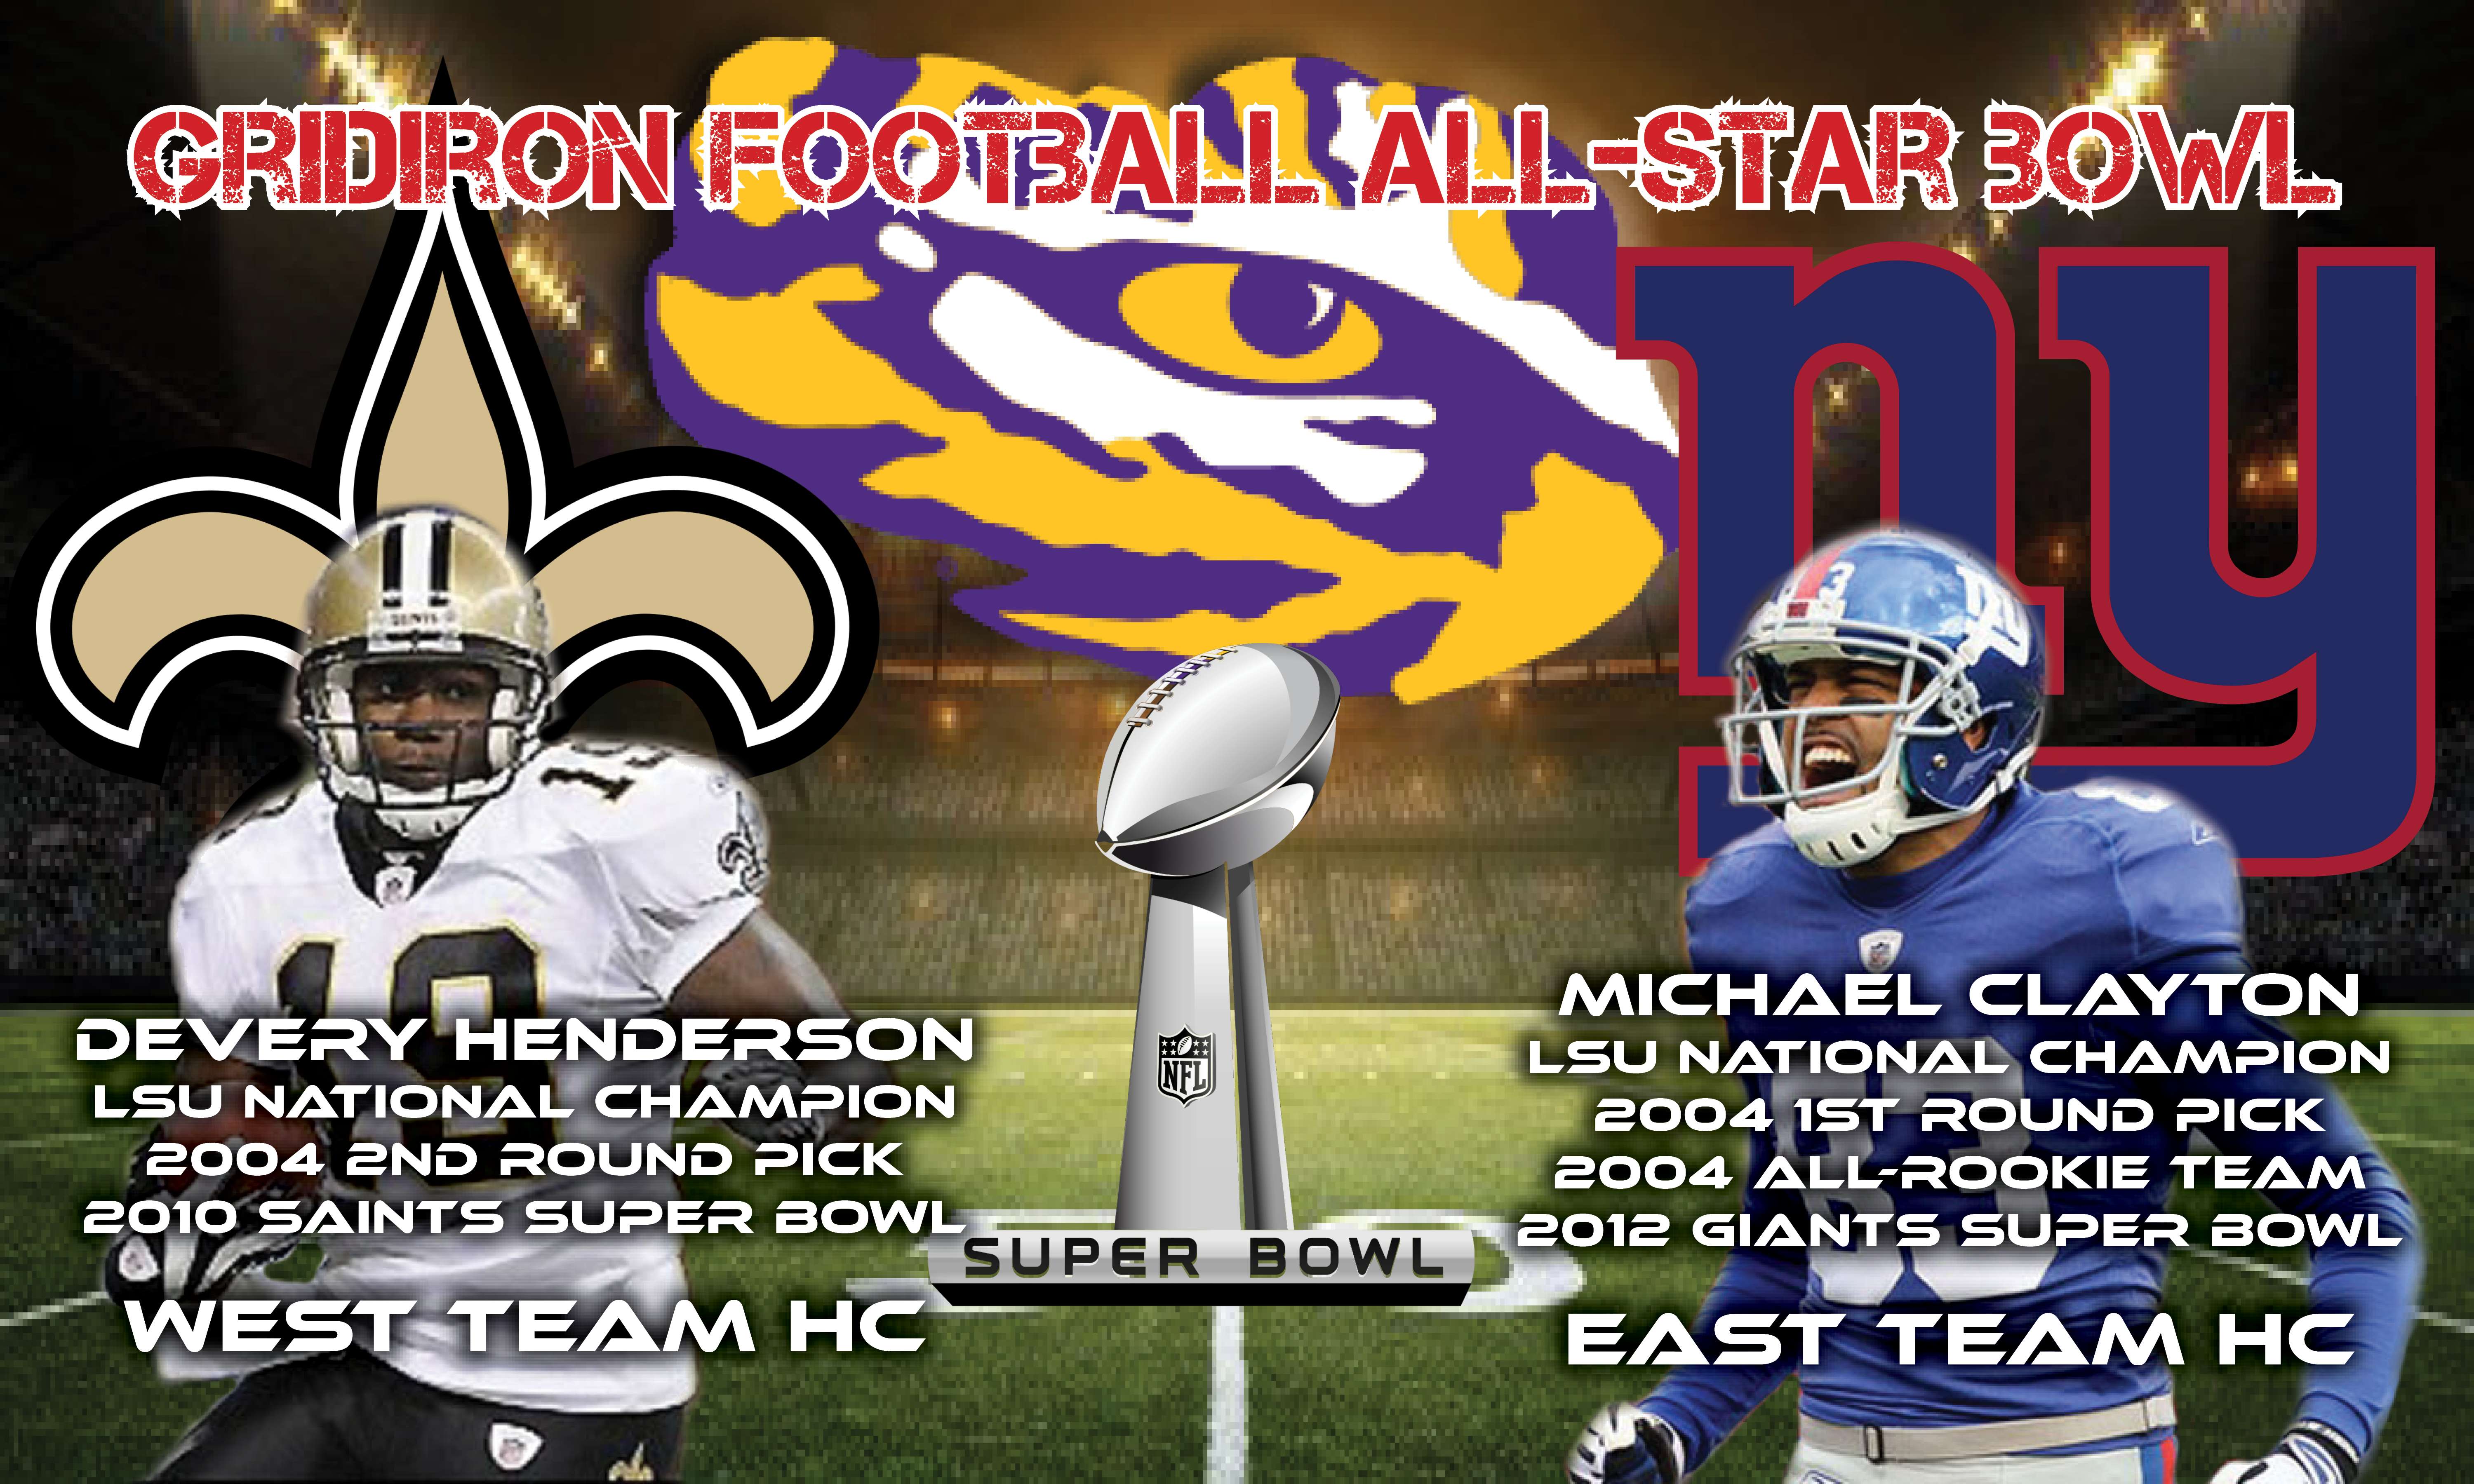 Michael Clayton and Devery Henderson to Serve as Head Coaches of the 2021 Gridiron Football All-Star Bowl